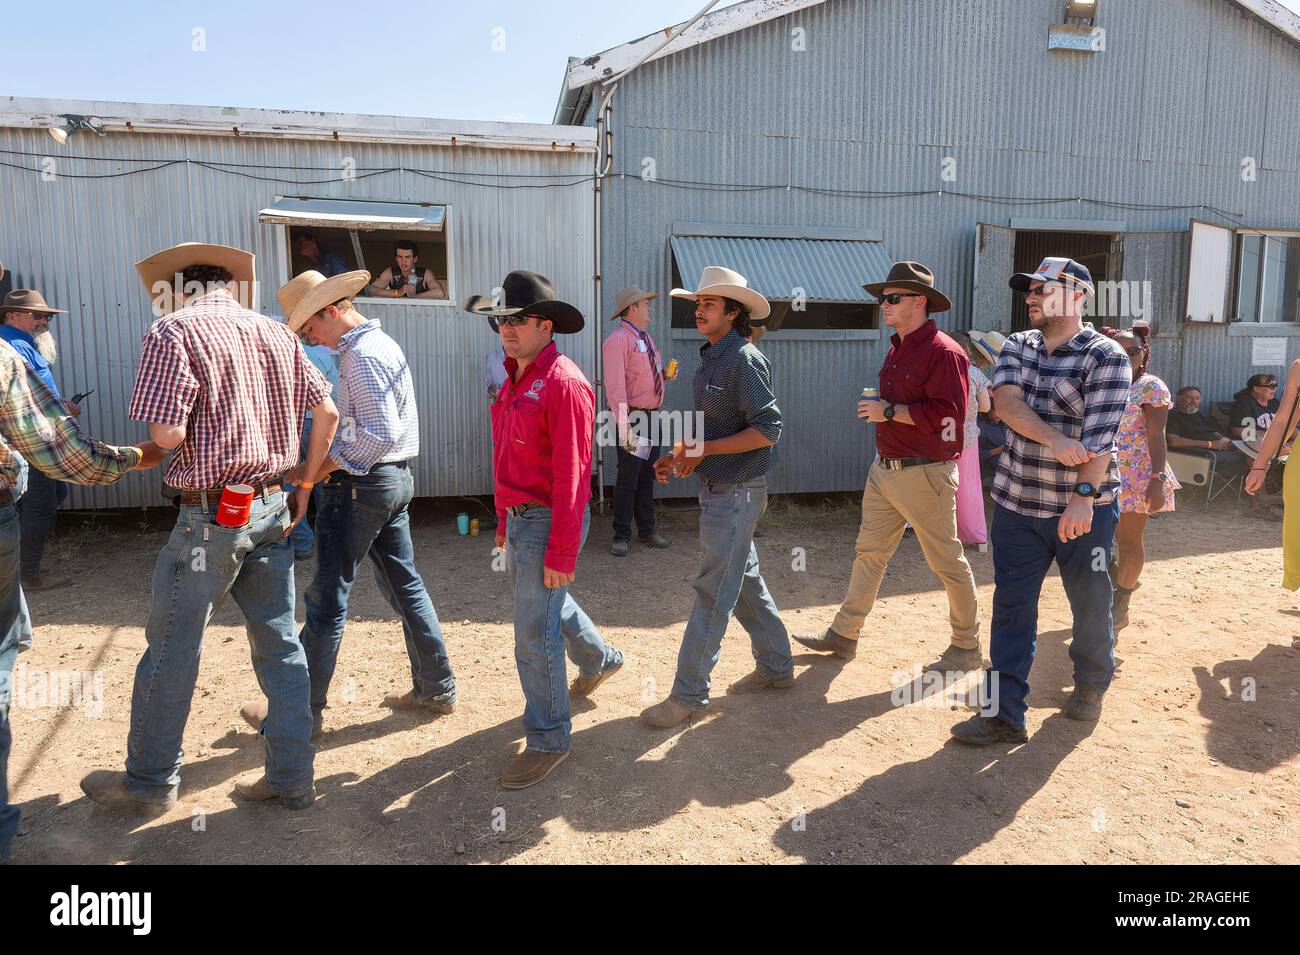 Group of young men wearing cowboy hats during the ABC Bush Races at Brunette Downs, a traditional Outback event, Northern Territory, NT, Australia Stock Photo